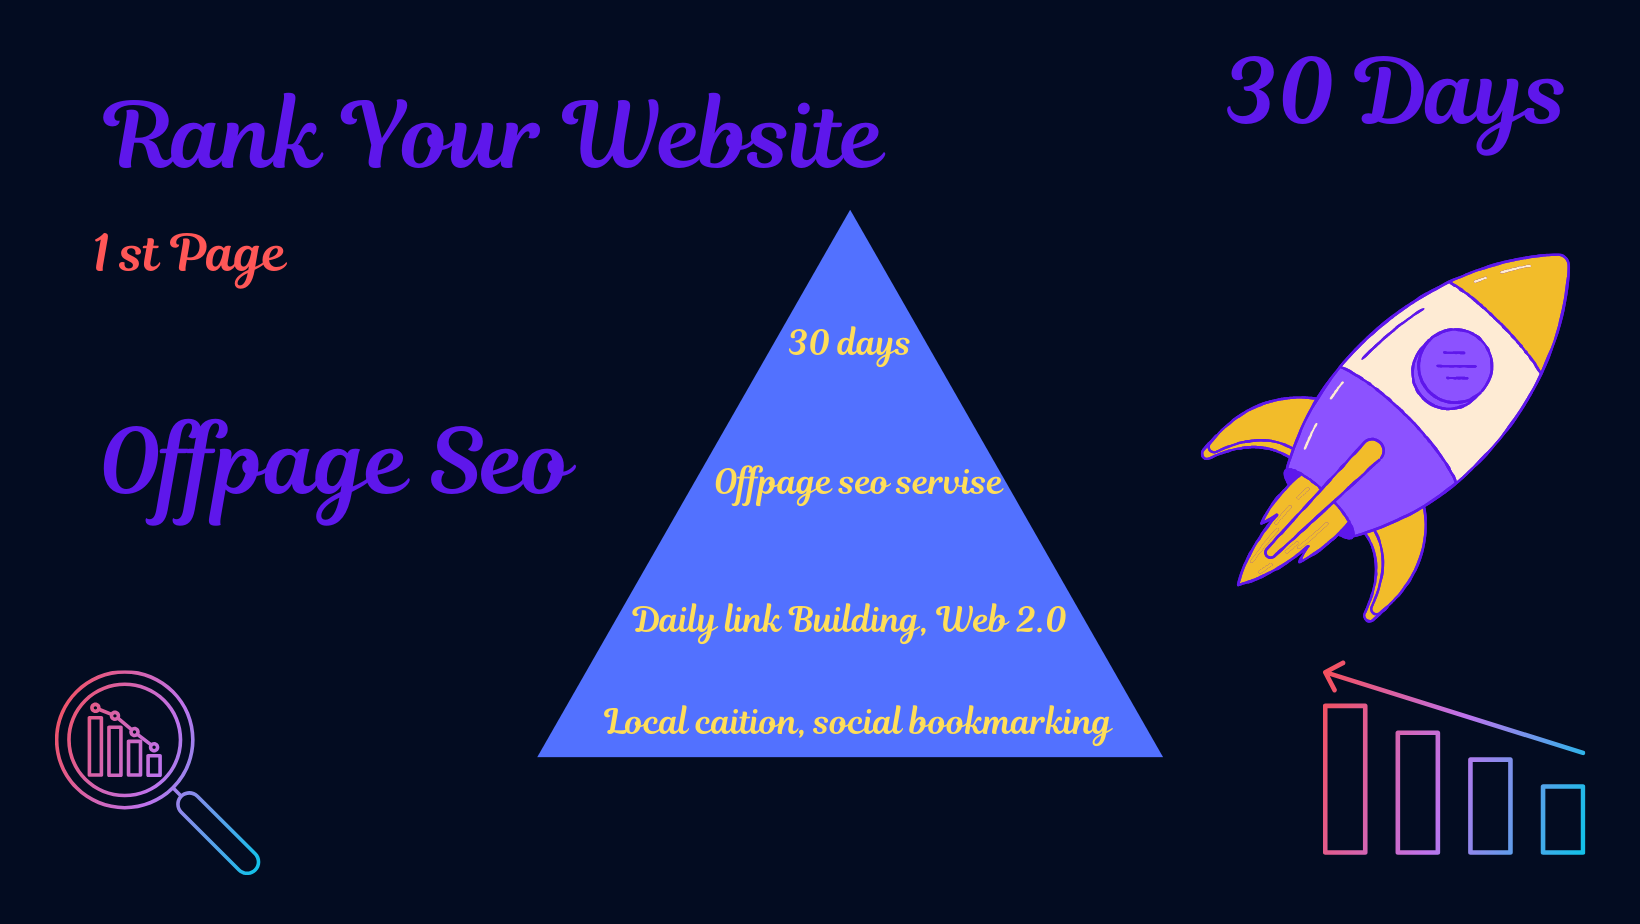 Rank your website for 30 days with off page seo